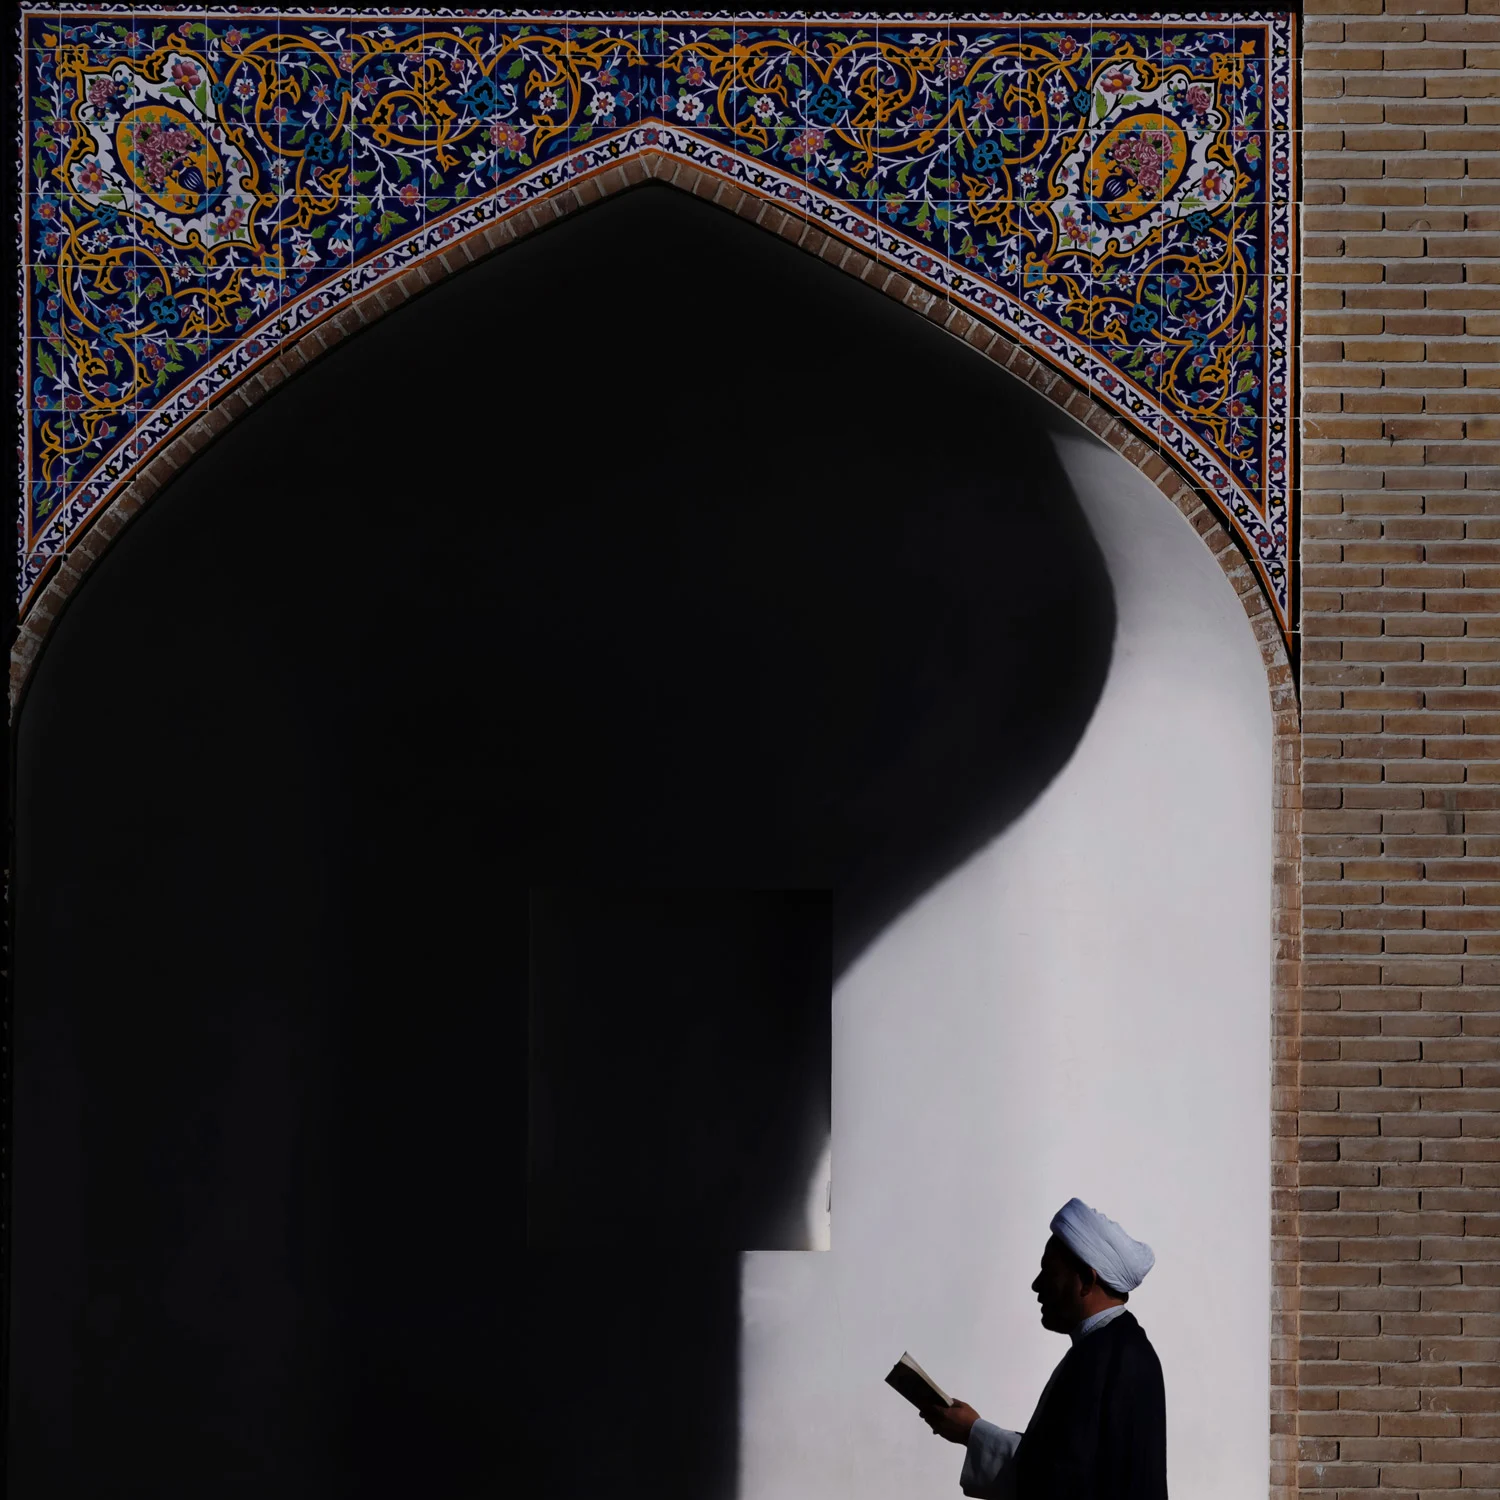 A picture of one of the clerics, featuring a man in a white turban holding one of the holy books and praying to God. Behind him sits one of the corridors of the mosque, decorated with pieces of beautiful artistic mosaics.